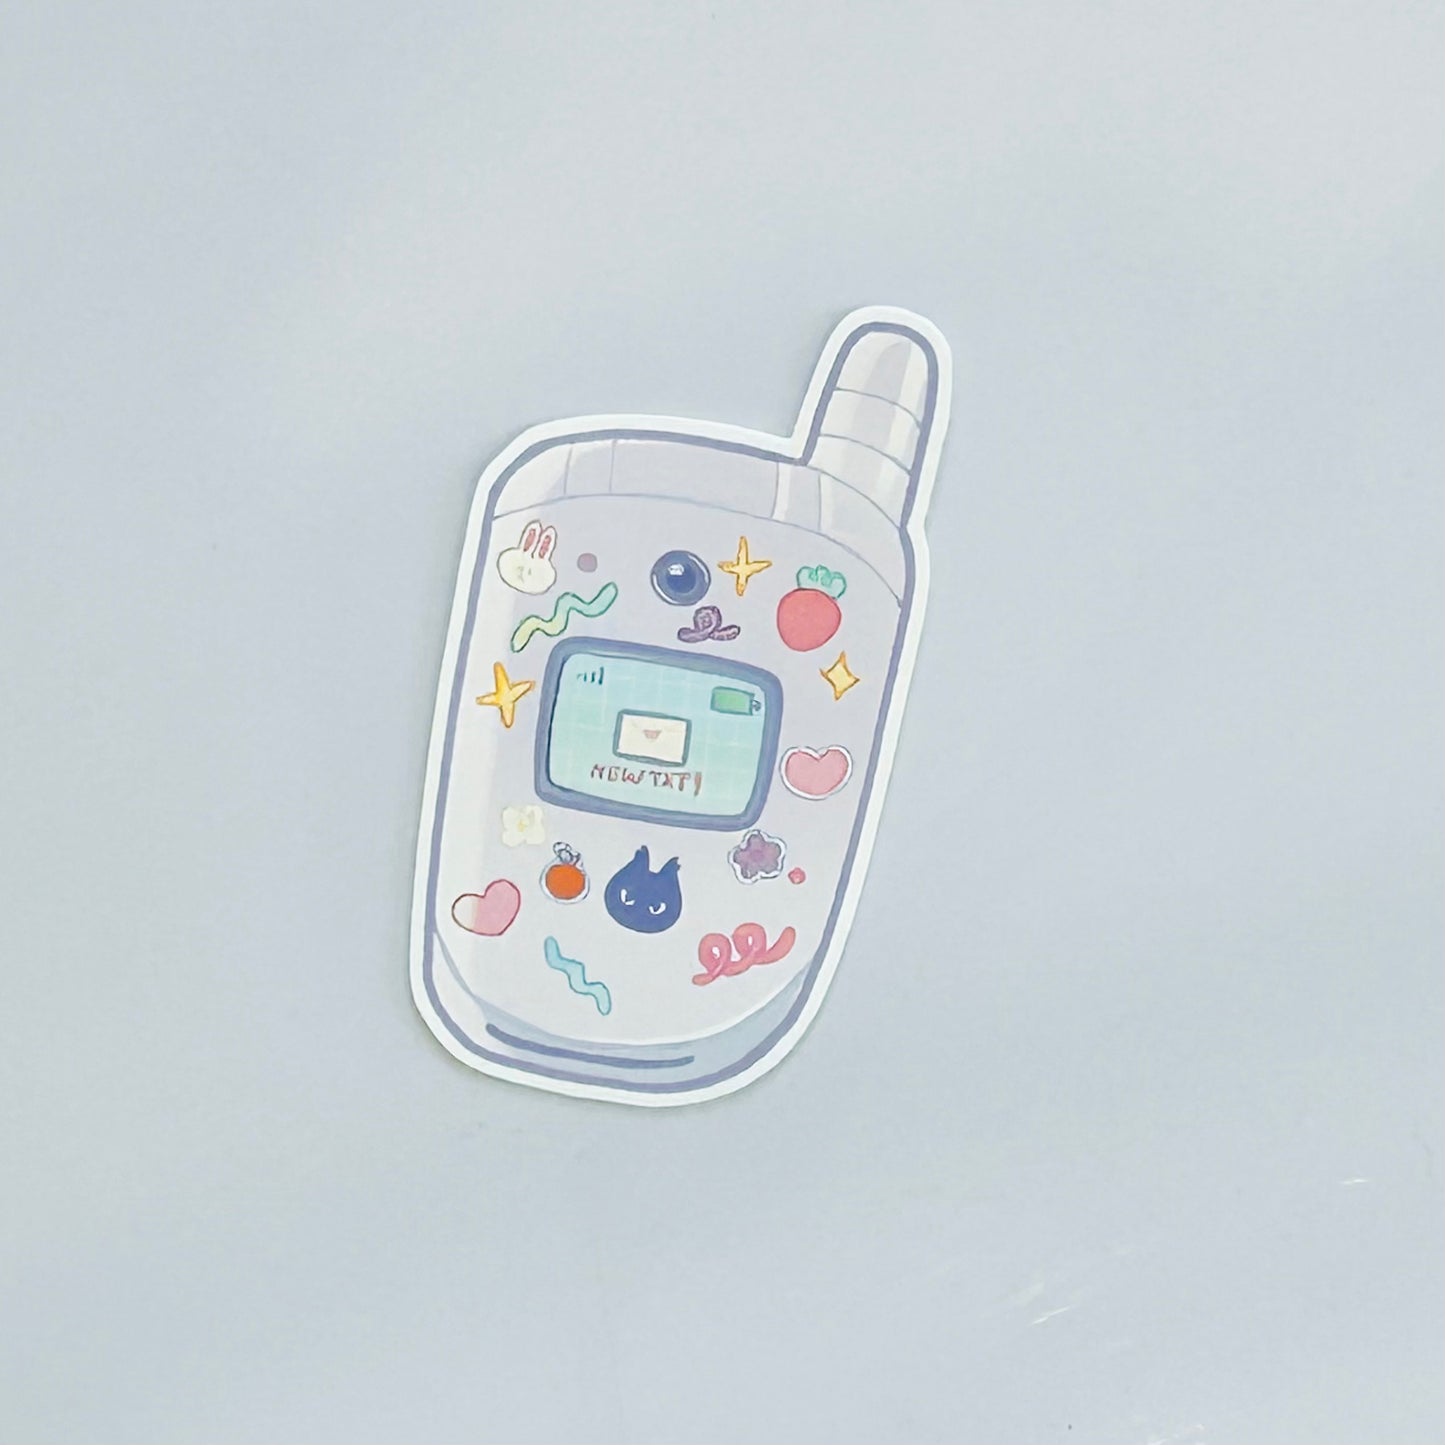 celly phone stickers